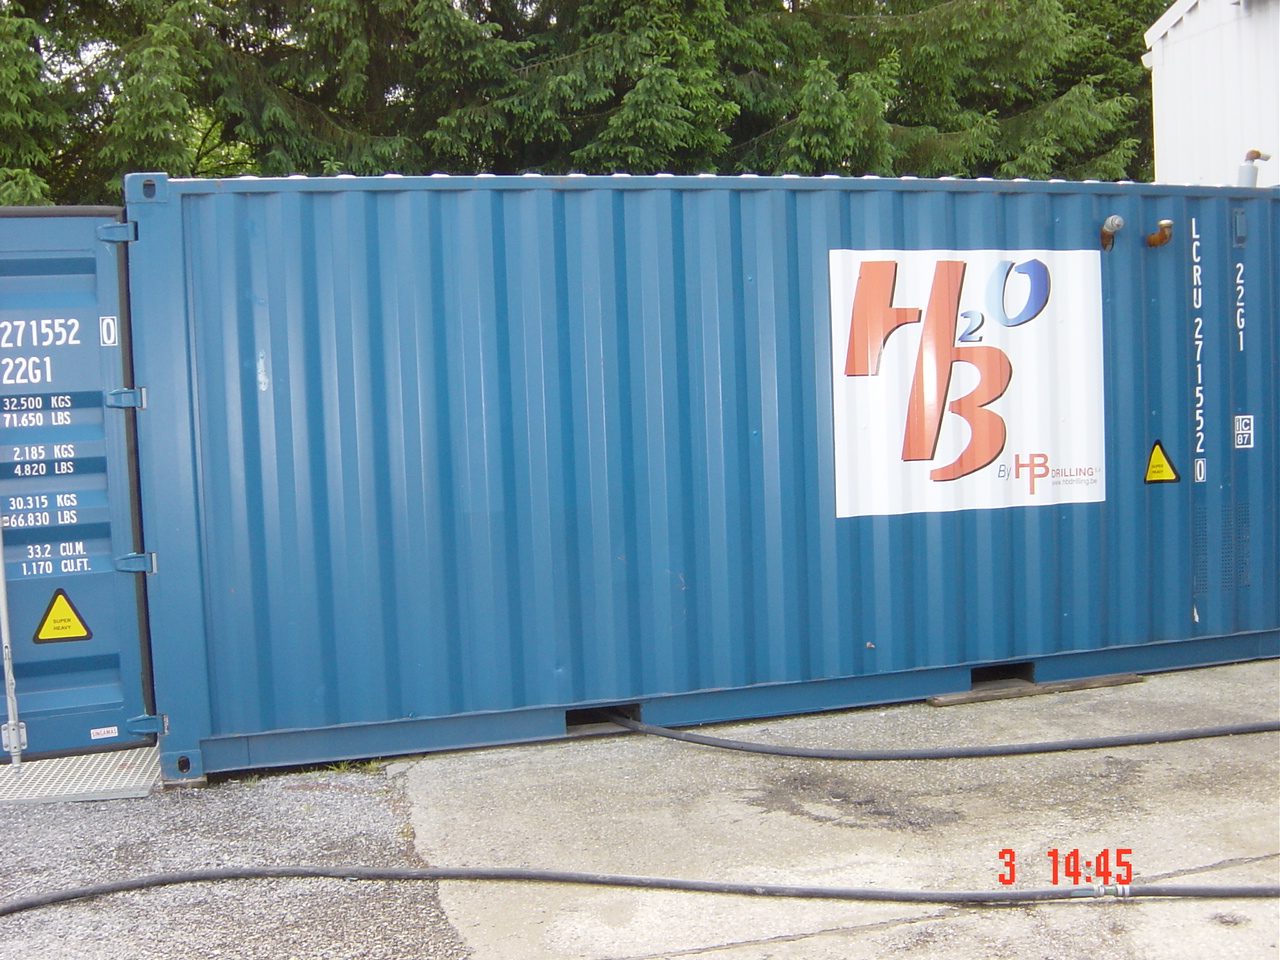 Exterior view of container